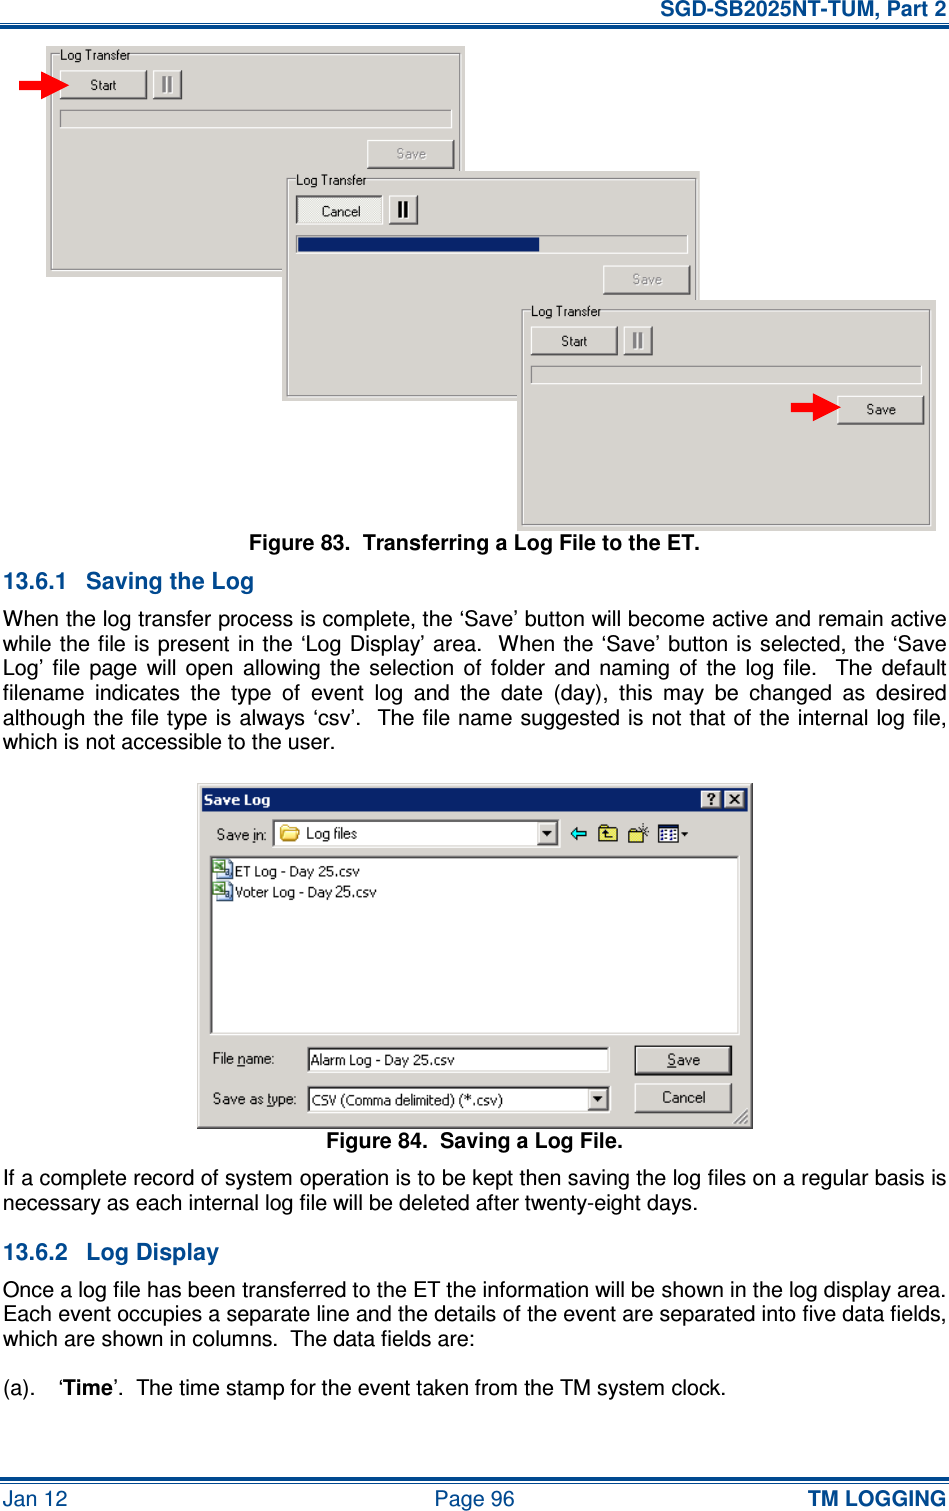   SGD-SB2025NT-TUM, Part 2 Jan 12  Page 96 TM LOGGING Figure 83.  Transferring a Log File to the ET. 13.6.1  Saving the Log When the log transfer process is complete, the ‘Save’ button will become active and remain active while the file is present in the ‘Log Display’ area.  When the ‘Save’ button is selected, the ‘Save Log’  file  page  will  open  allowing  the  selection  of  folder  and  naming  of  the  log  file.    The  default filename  indicates  the  type  of  event  log  and  the  date  (day),  this  may  be  changed  as  desired although the file type is always ‘csv’.   The file name suggested is not that of the internal log file, which is not accessible to the user. Figure 84.  Saving a Log File. If a complete record of system operation is to be kept then saving the log files on a regular basis is necessary as each internal log file will be deleted after twenty-eight days. 13.6.2  Log Display Once a log file has been transferred to the ET the information will be shown in the log display area.  Each event occupies a separate line and the details of the event are separated into five data fields, which are shown in columns.  The data fields are: (a).  ‘Time’.  The time stamp for the event taken from the TM system clock. 